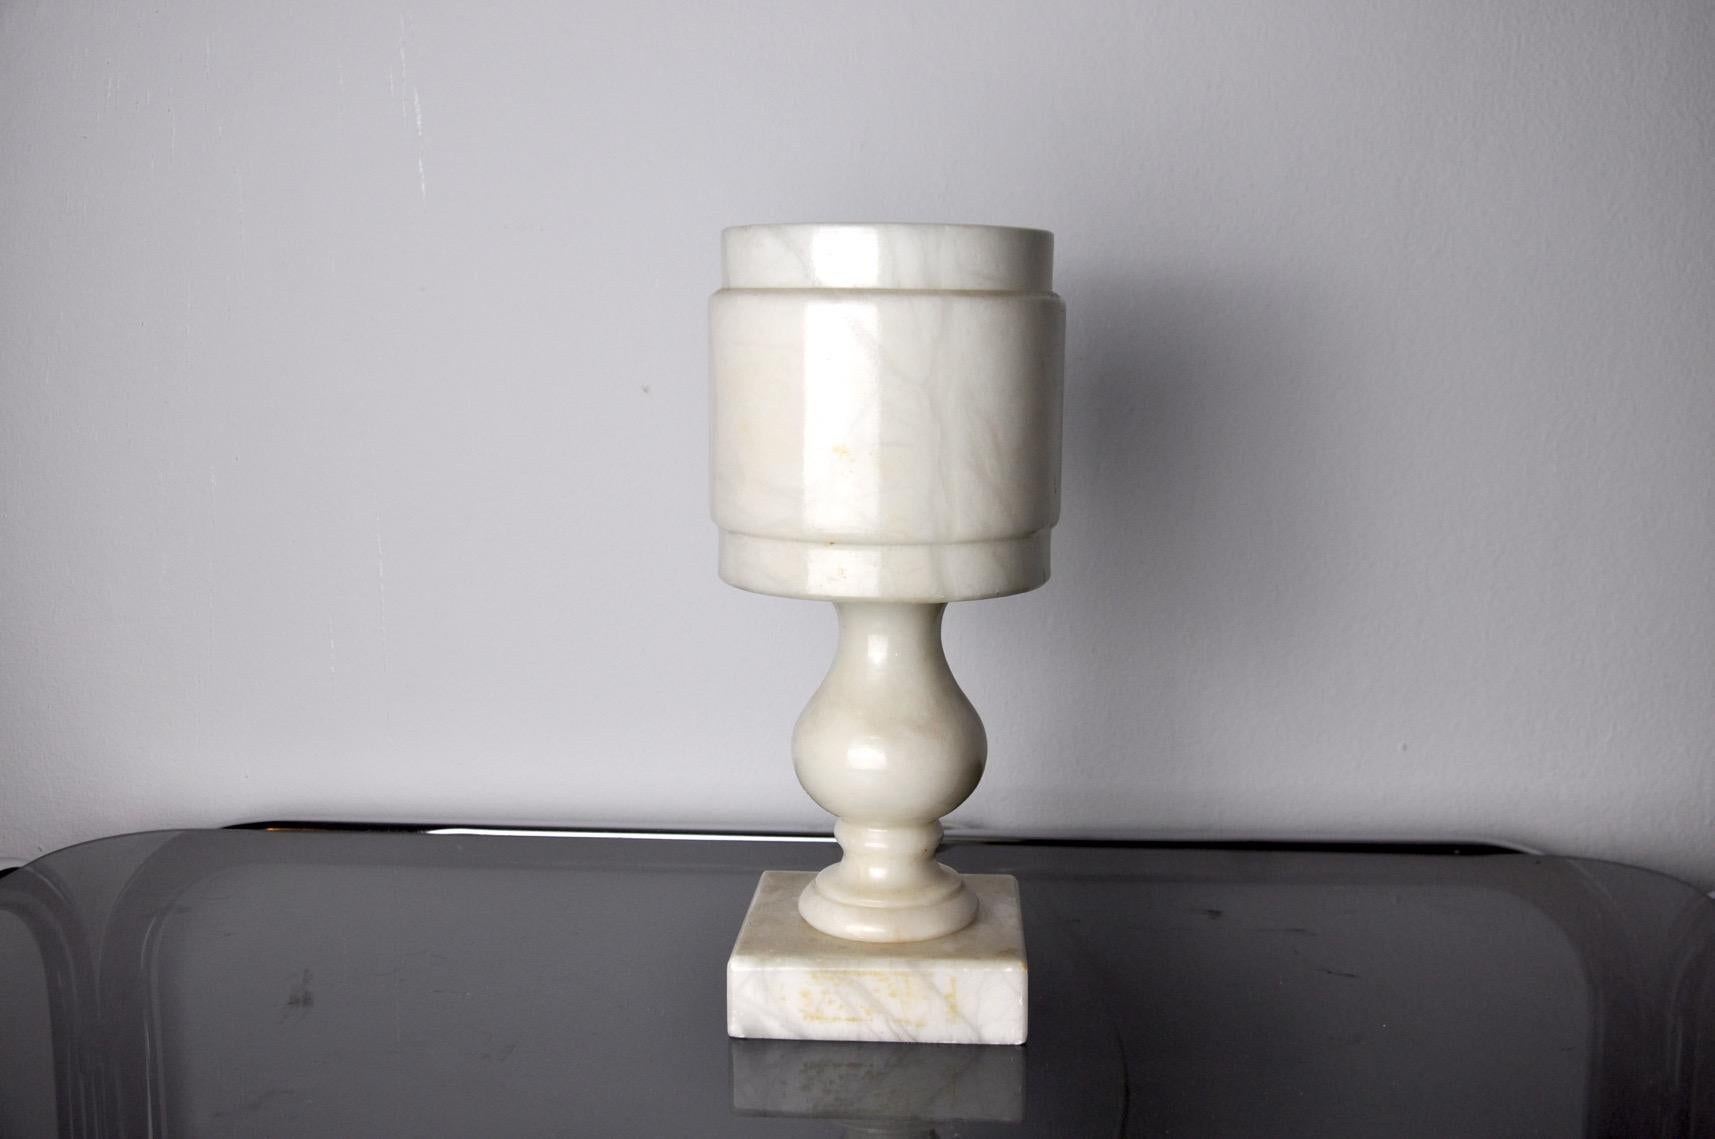 Very nice little brutalist alabaster table lamp designed and produced in Spain in the 1980s. Unique object that will illuminate wonderfully and bring a real design touch to your interior. Electricity checked, mark of time in accordance with the age